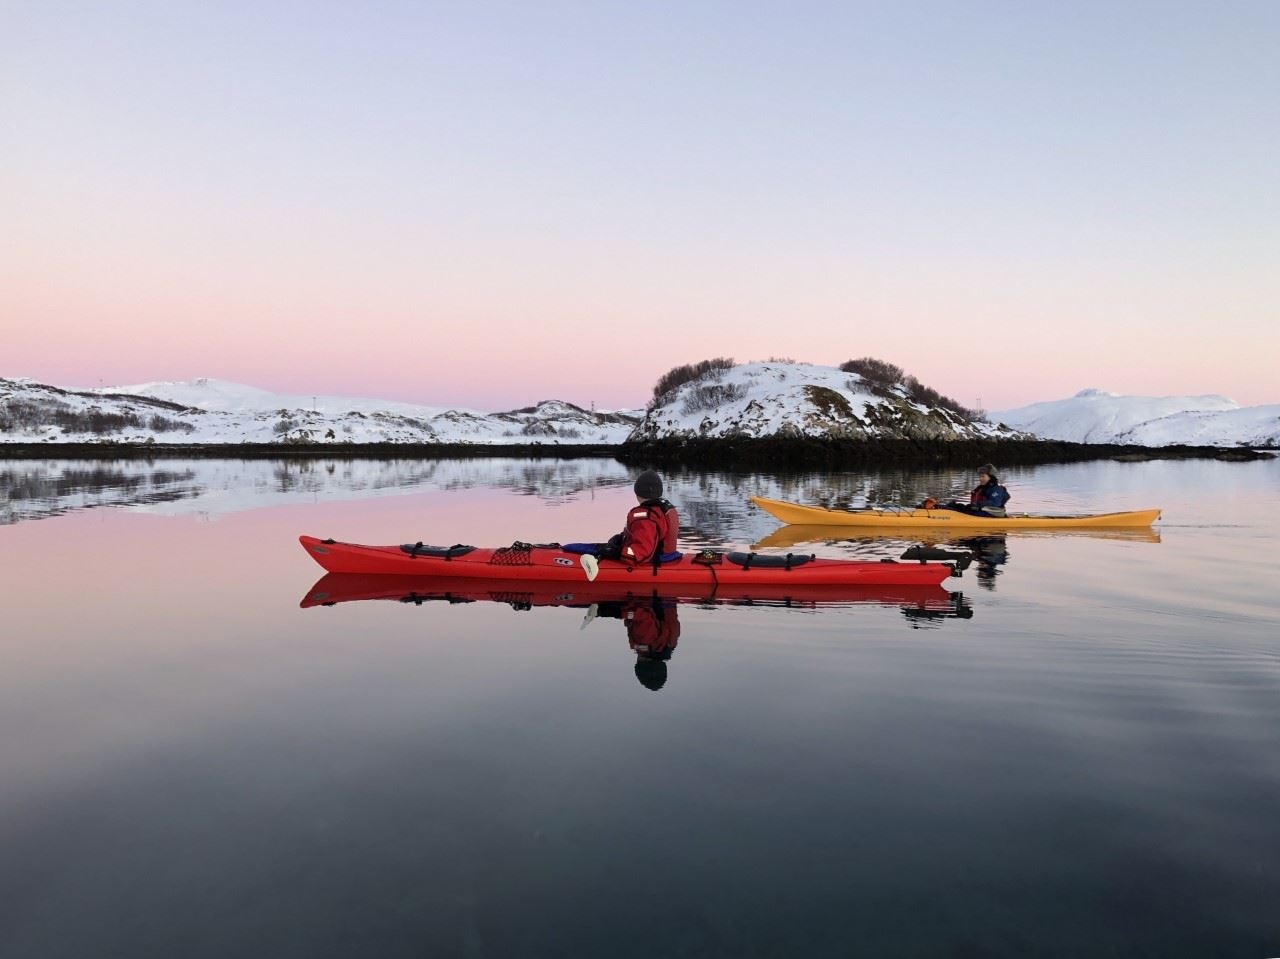 Private three days Arctic Camp with kayaking, skiing and snowshoeing - all inclusive